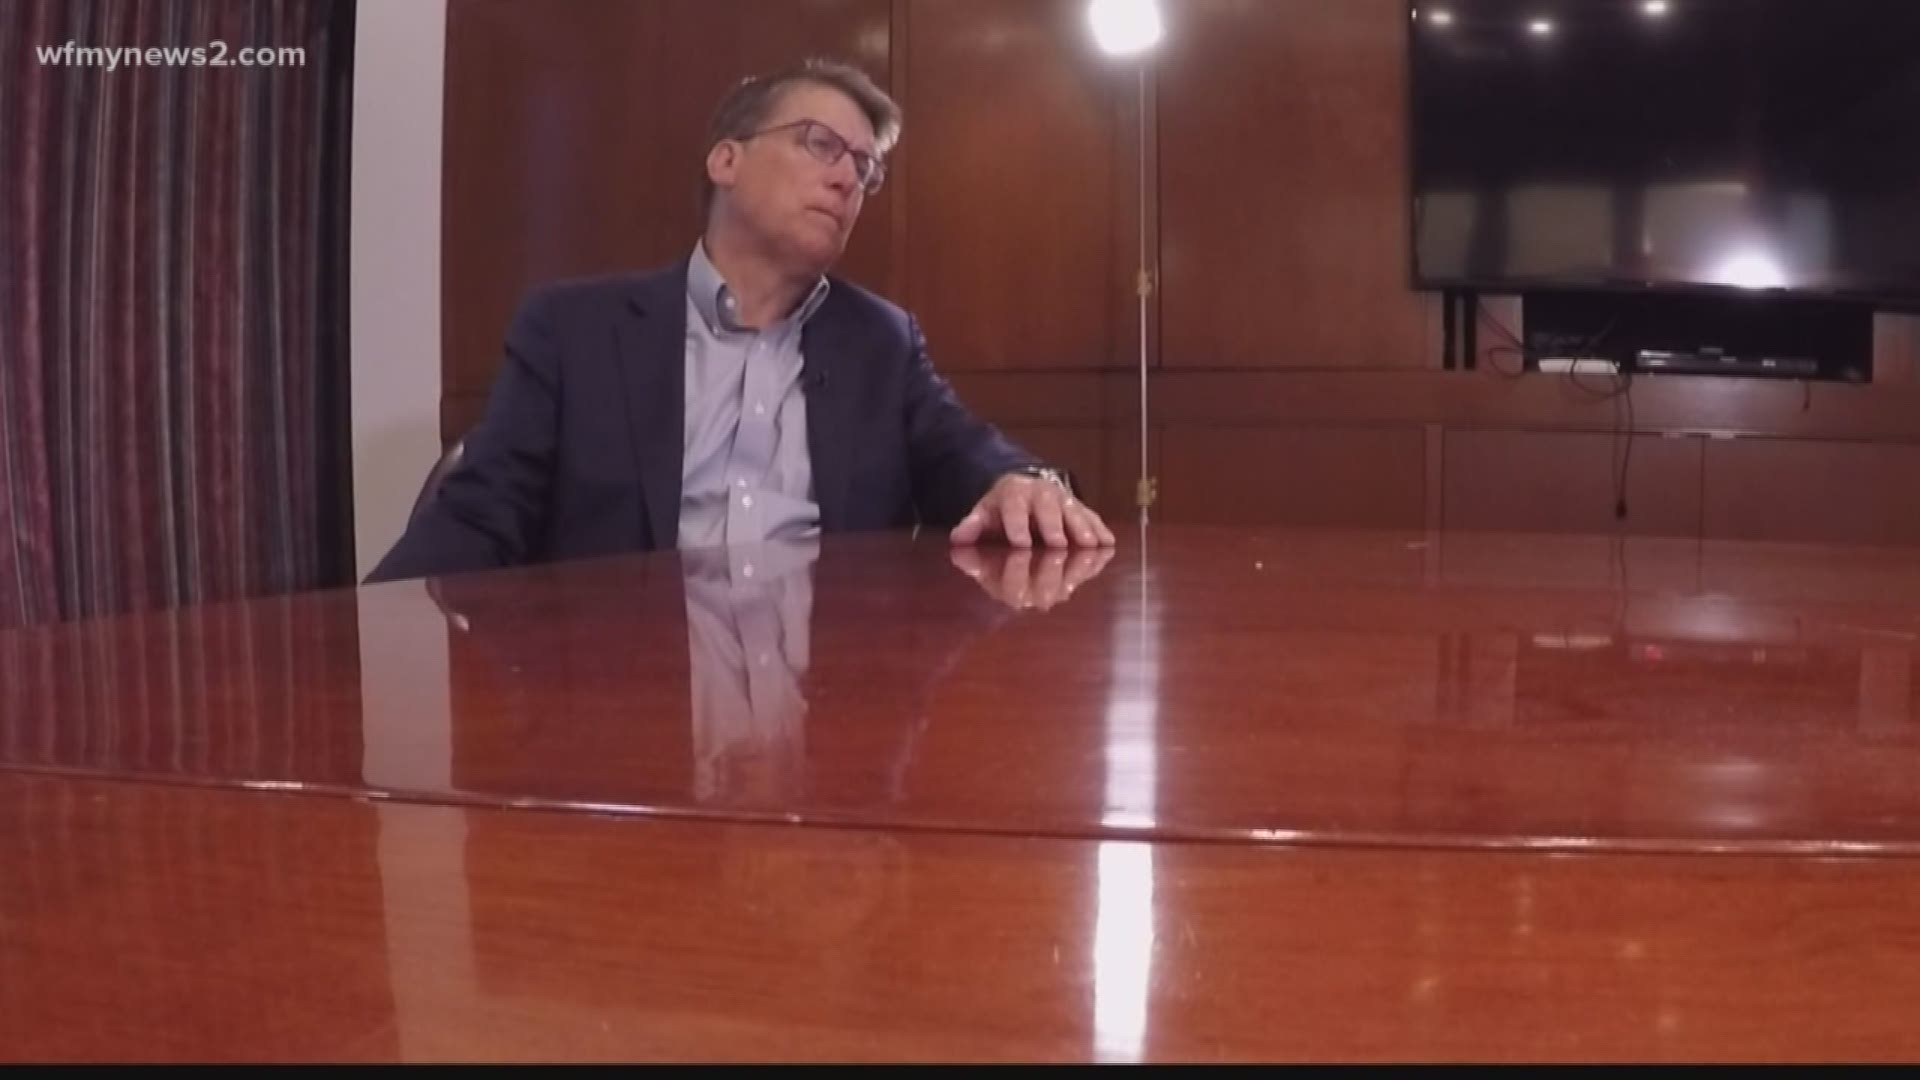 In his first extensive interview since losing re-election, former NC governor Pat McCrory talks to Meghann Mollerus about life, loss and whether he'll run for public office in the future.